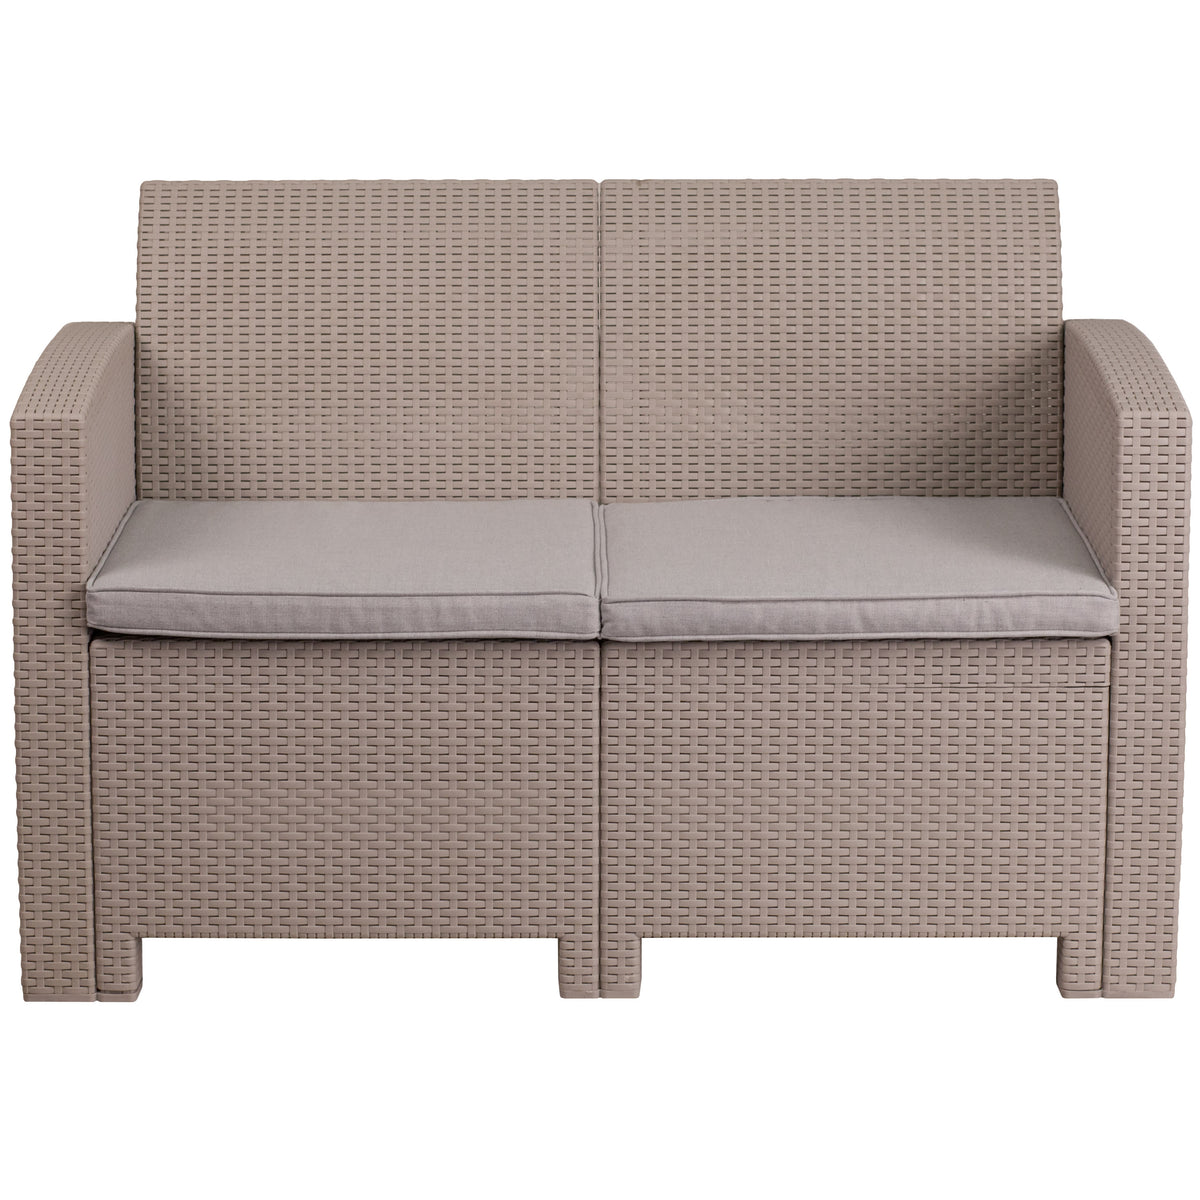 Light Gray |#| Lt Gray Faux Rattan Loveseat with All-Weather Light Gray Cushions - Patio Chair